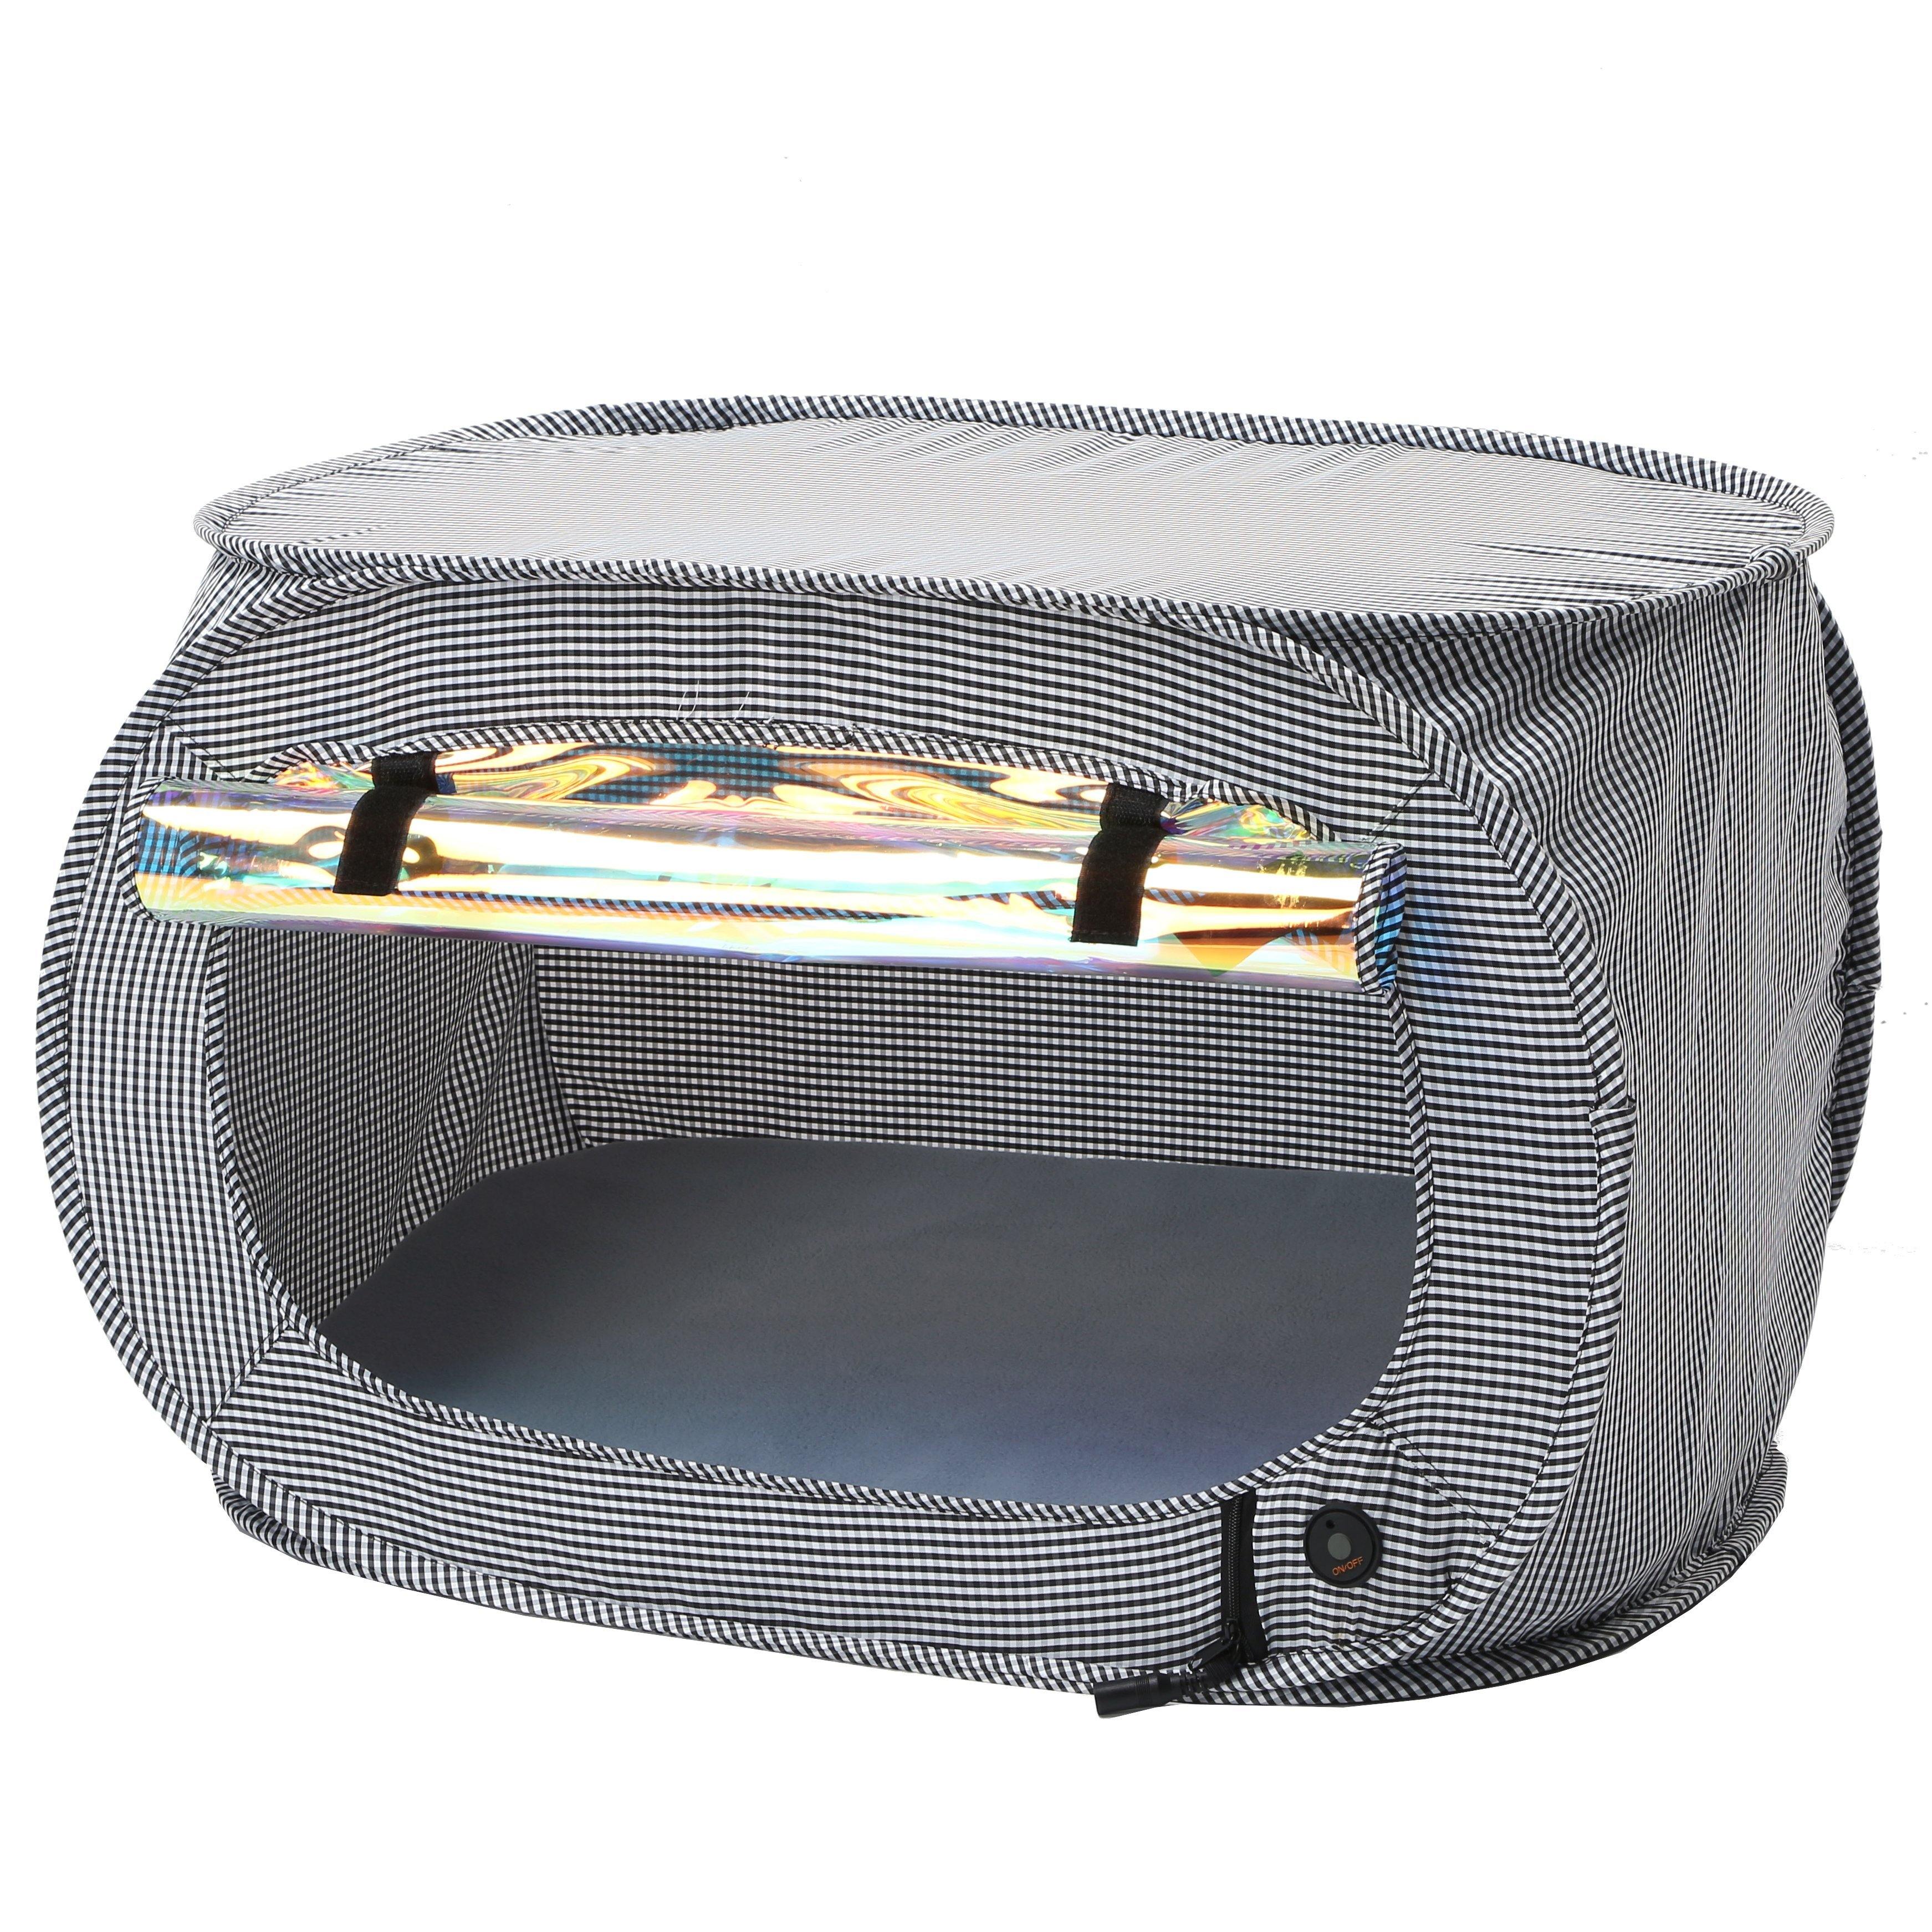 Pet Life "Enterlude" Electric Heating Wire Folding Travel Pet Tent Crate Grey 